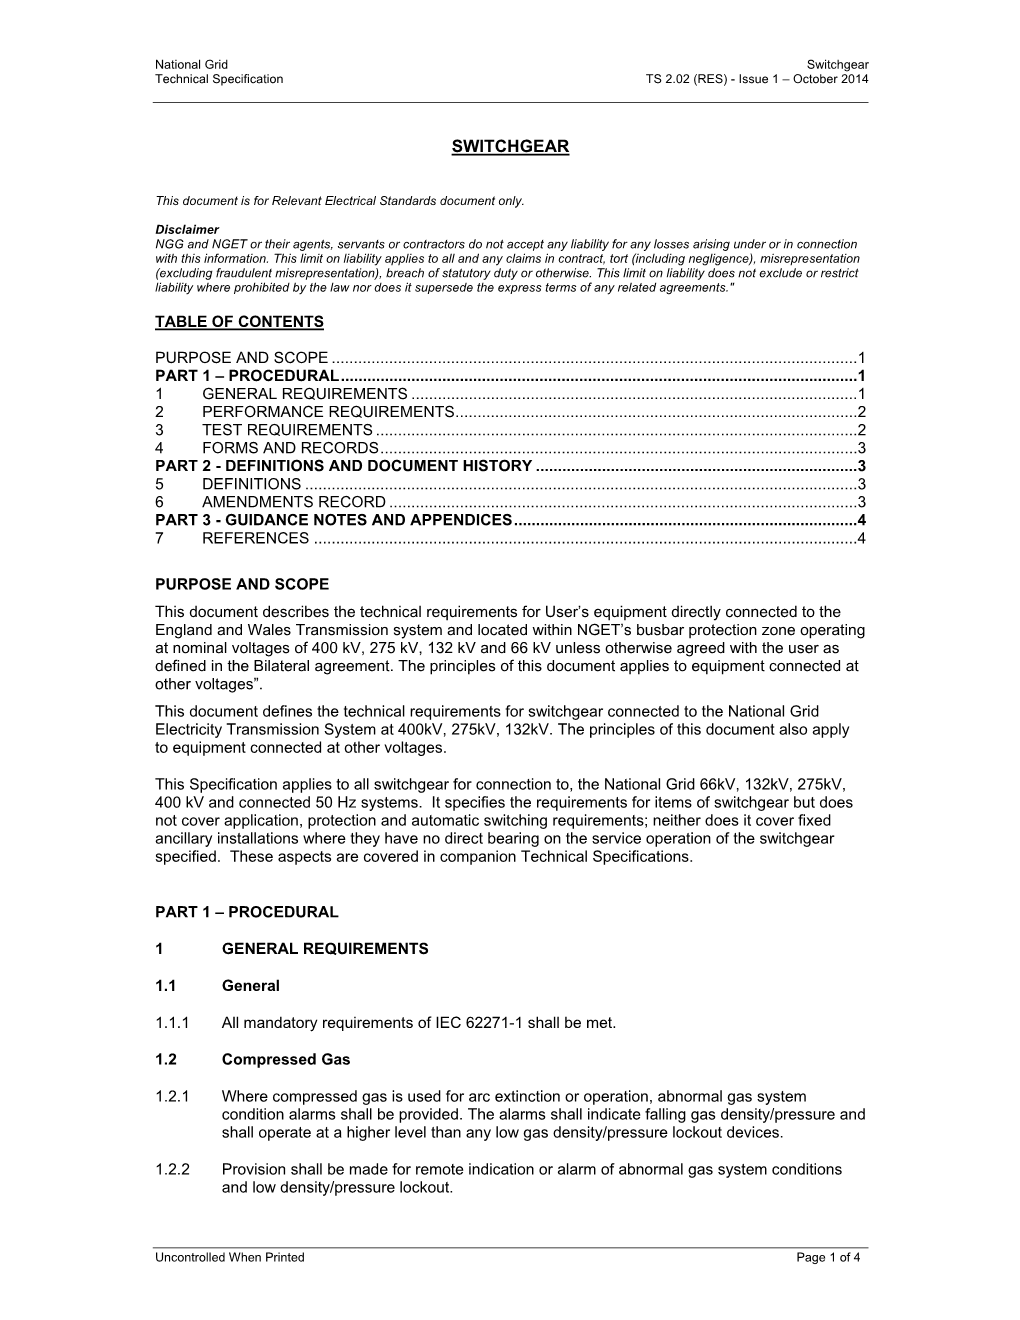 Switchgear Technical Specification TS 2.02 (RES) - Issue 1 – October 2014